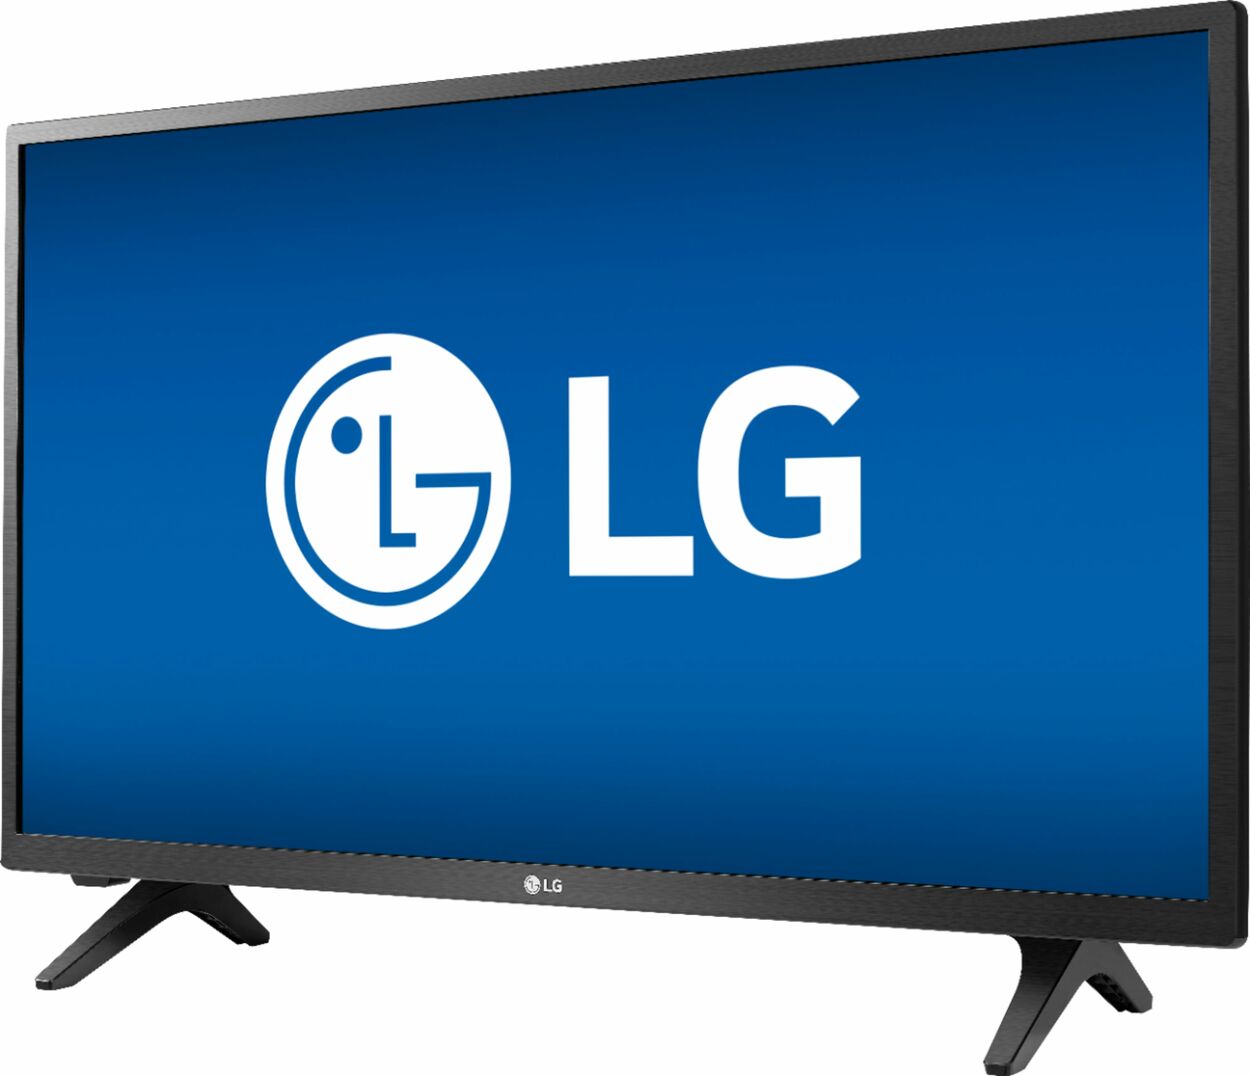 LG TV with the logo displayed on the screen.